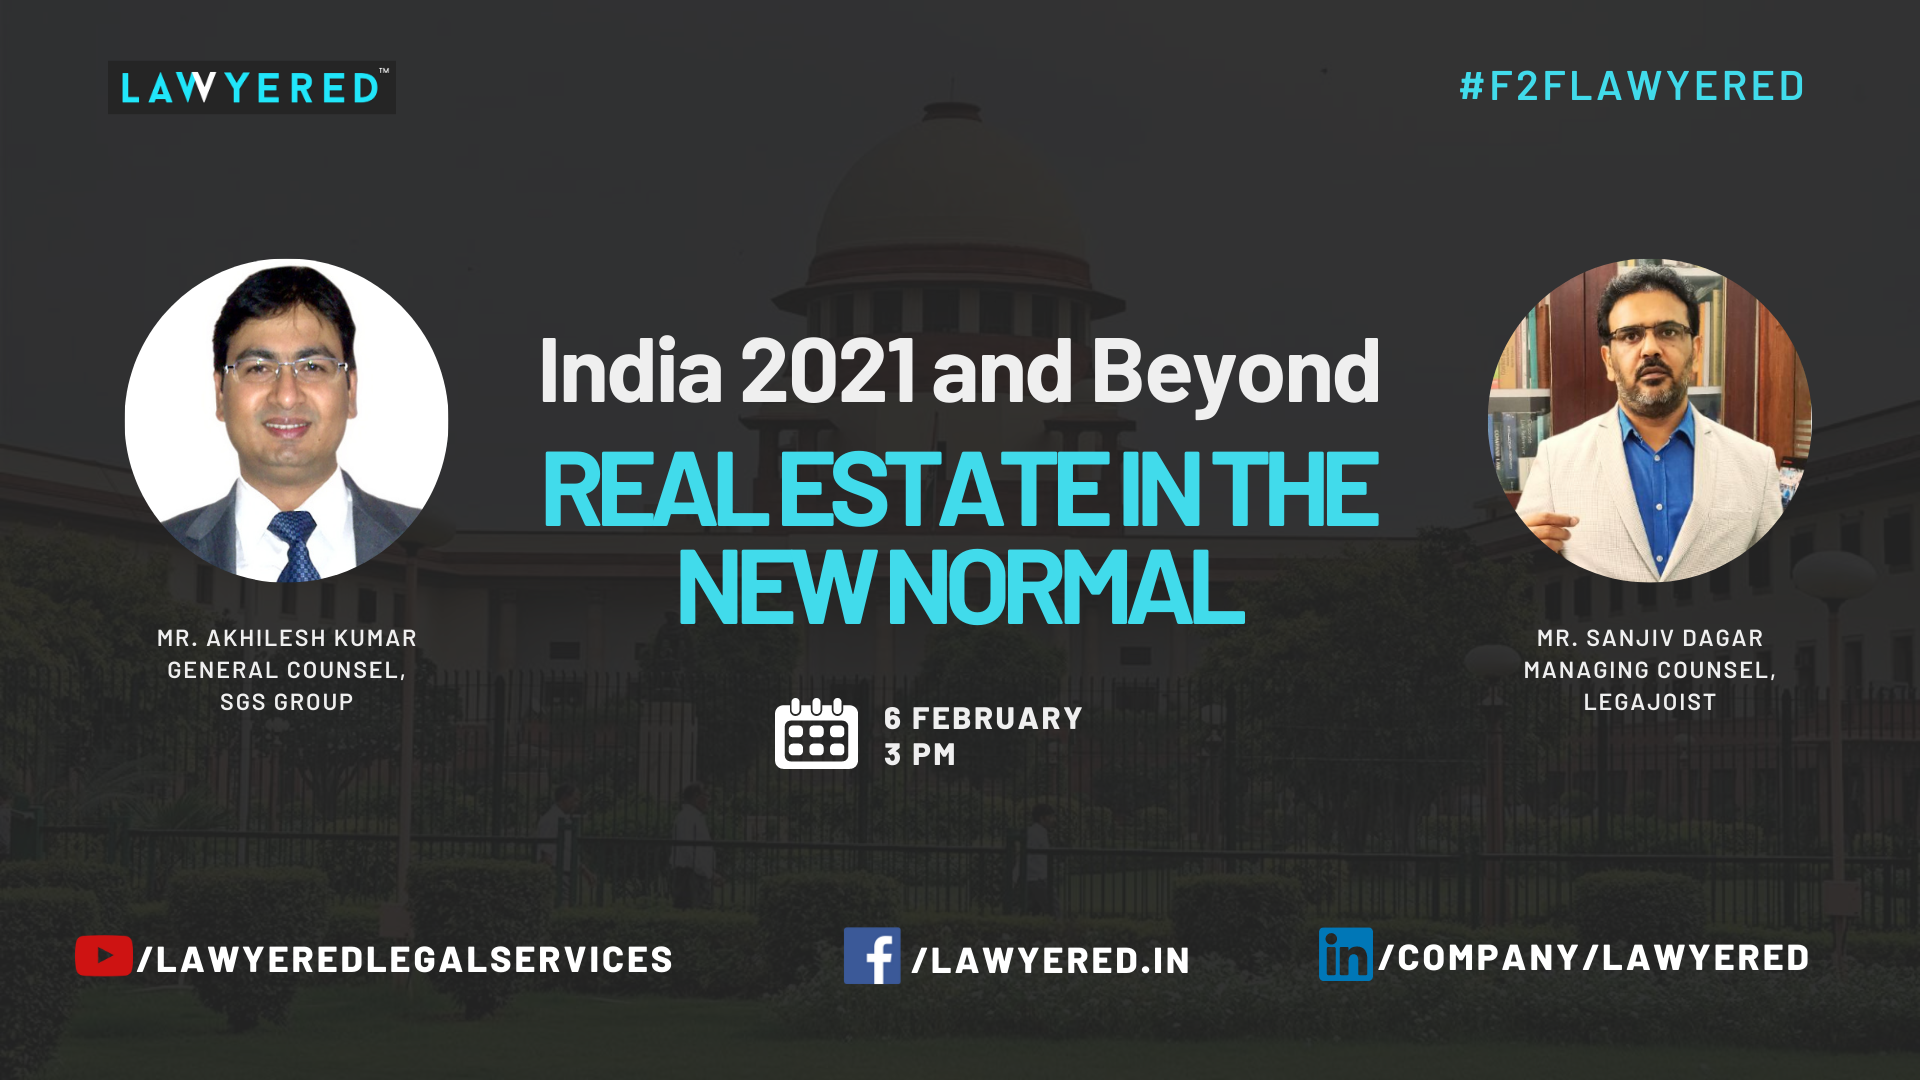 #F2FLawyered on India 2021 and Beyond: Real Estate in the New Normal with Mr. Sanjiv Dagar Dagar